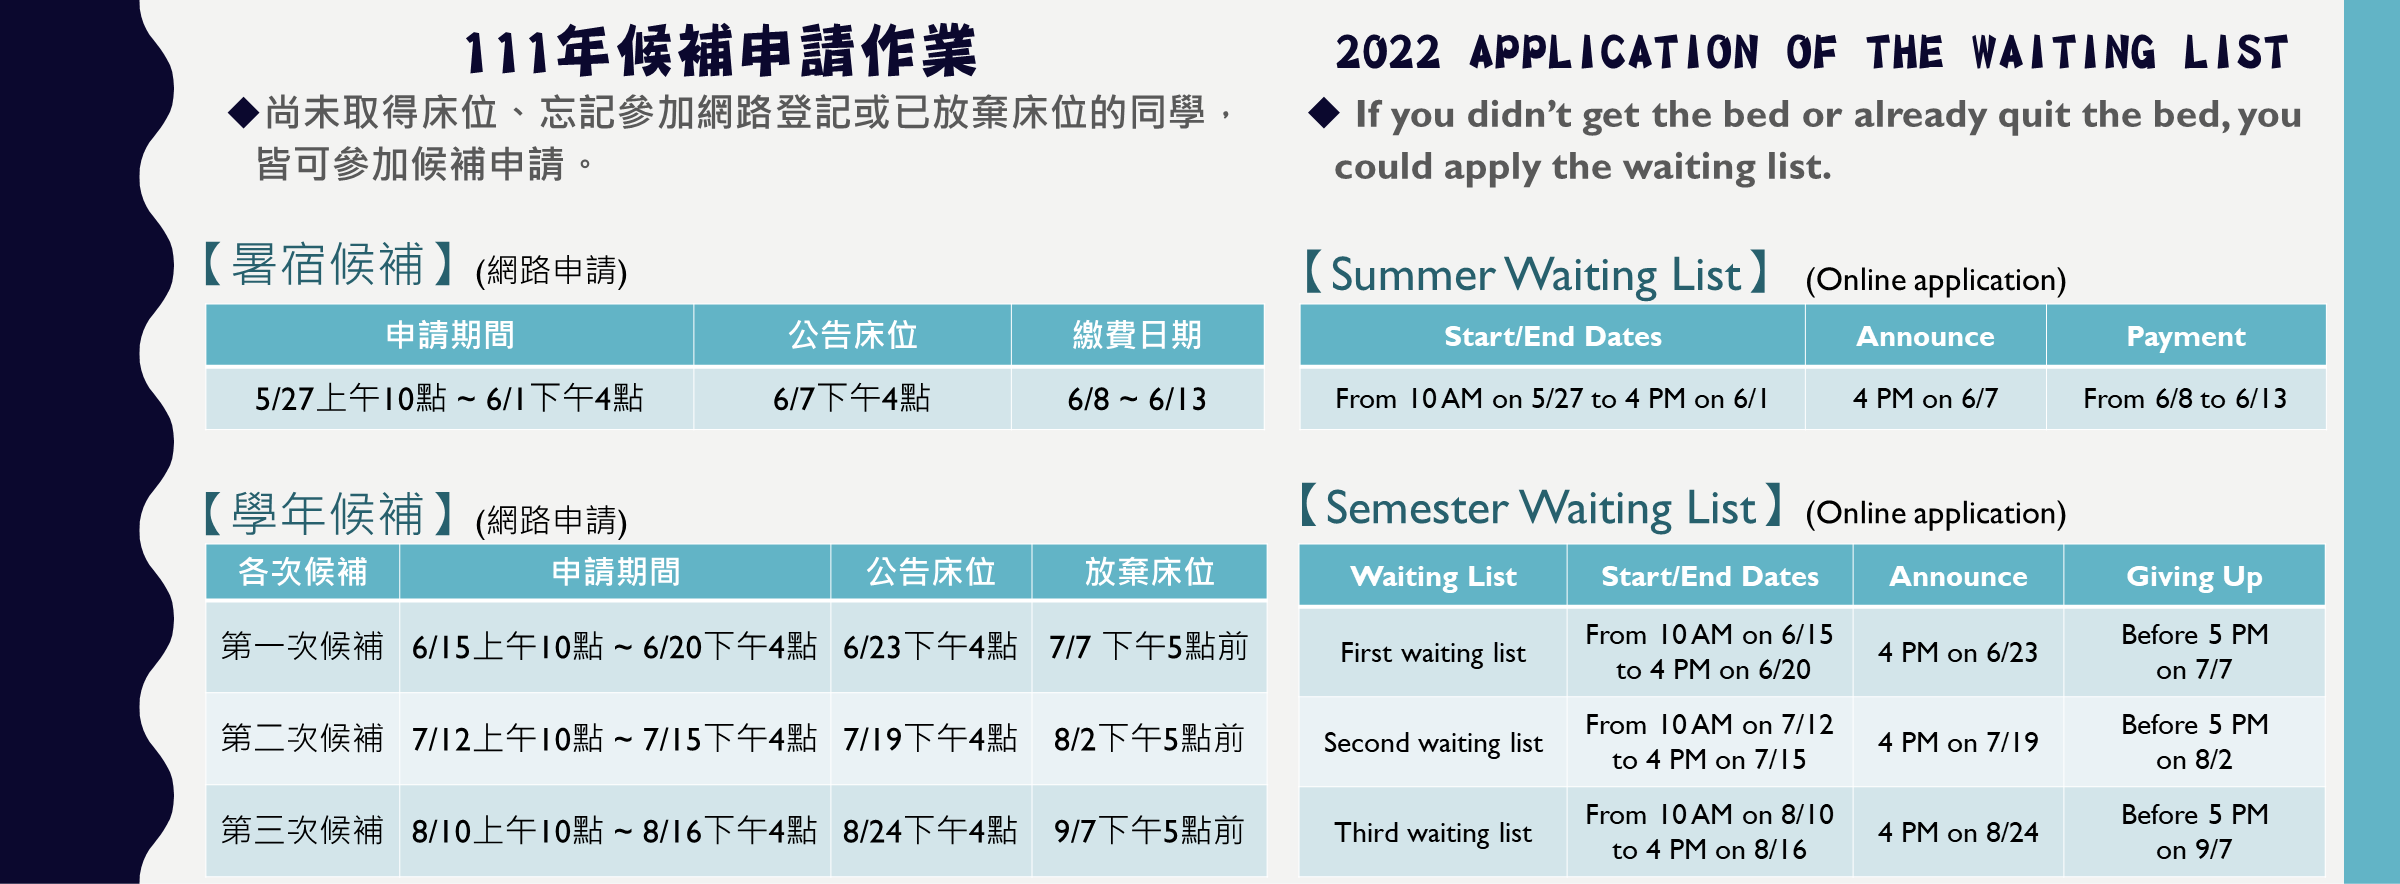 2022 Application of the waiting list